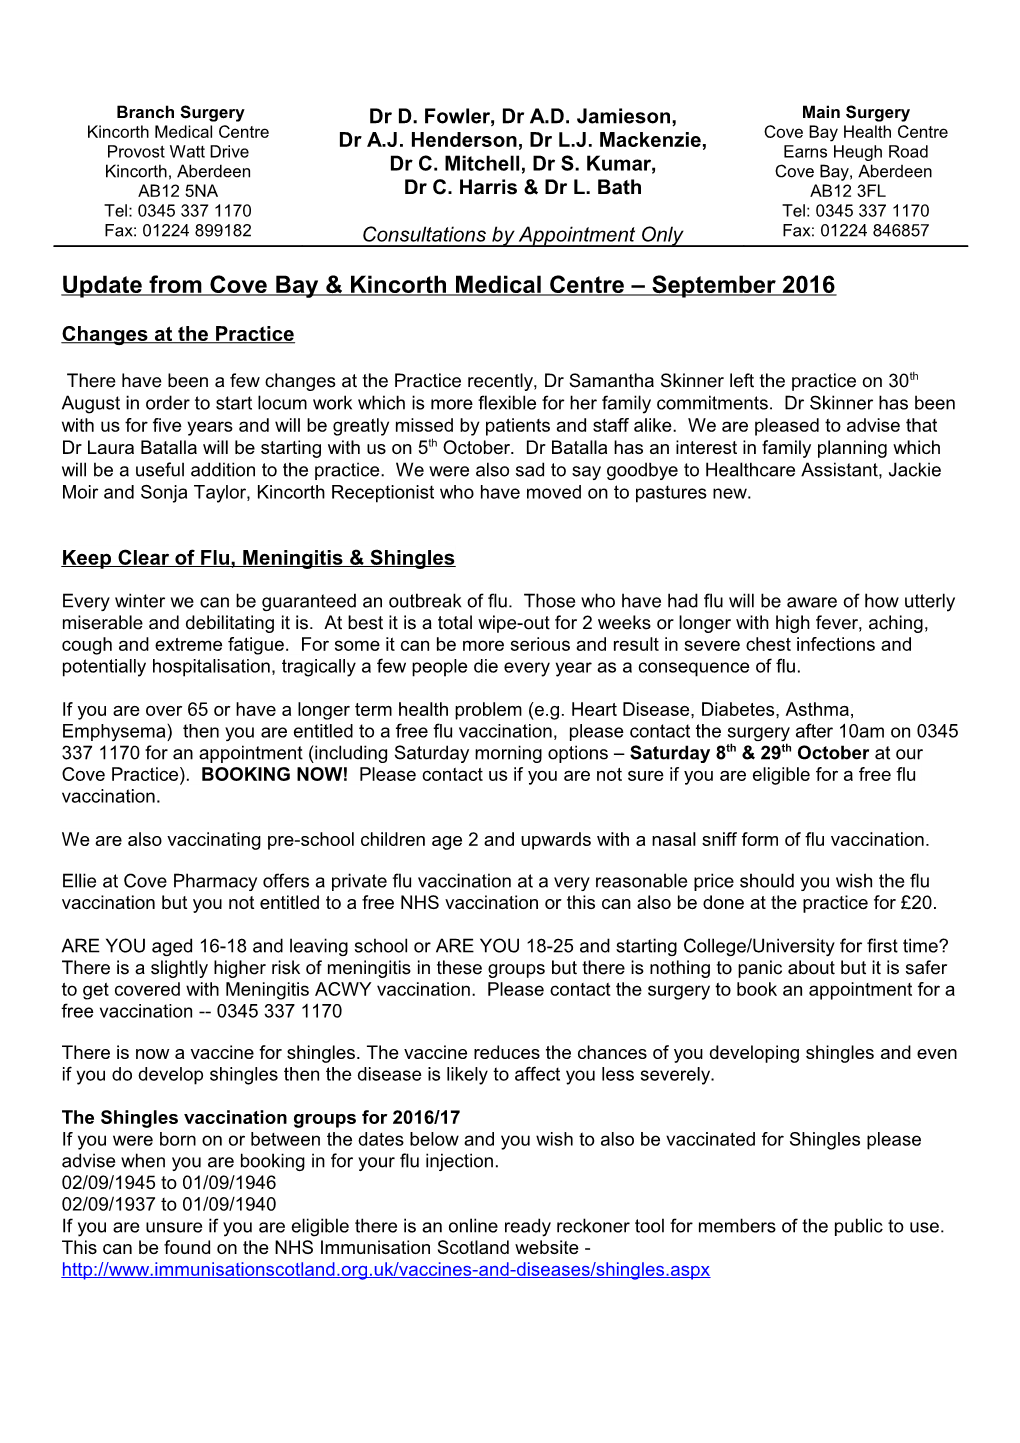 Update from Cove Bay & Kincorth Medical Centre September 2016